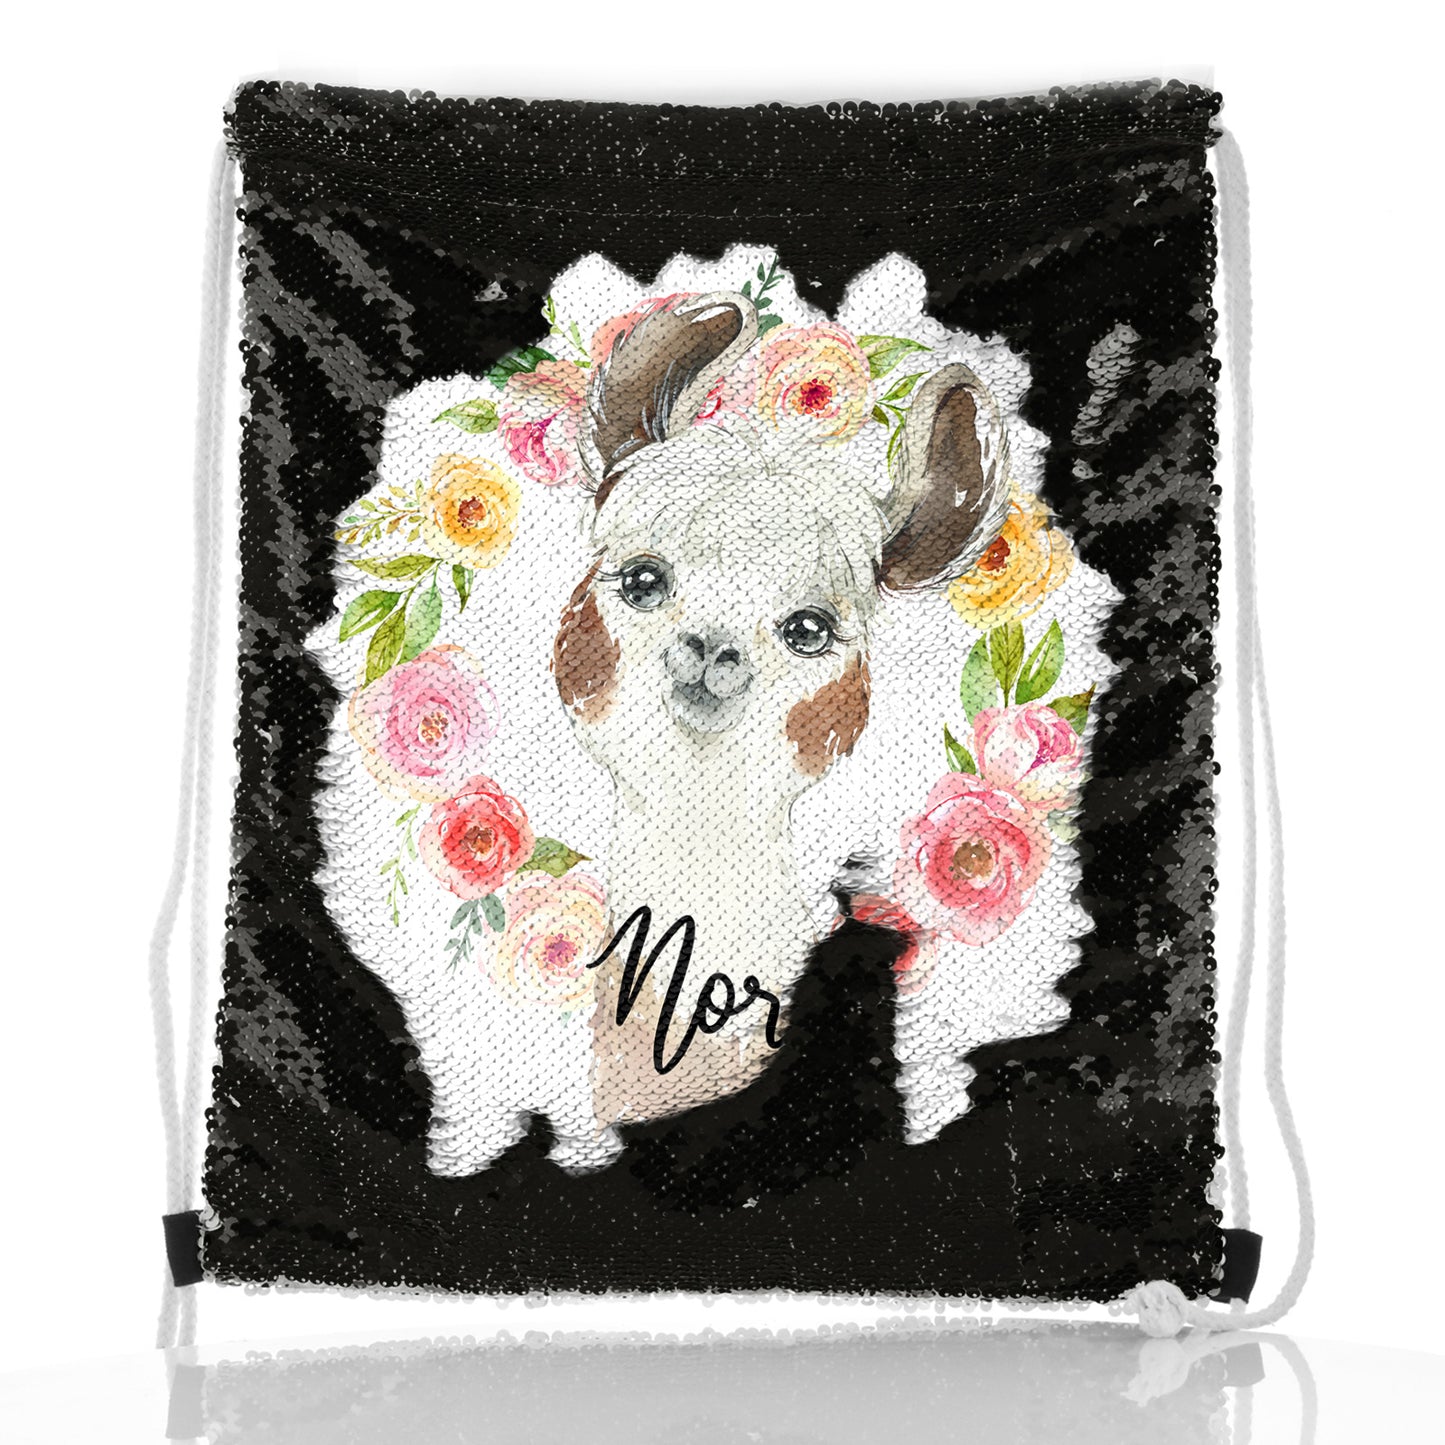 Personalised Sequin Drawstring Backpack with Brown and White Alpaca Multicolour Flower Wreath and Cute Text